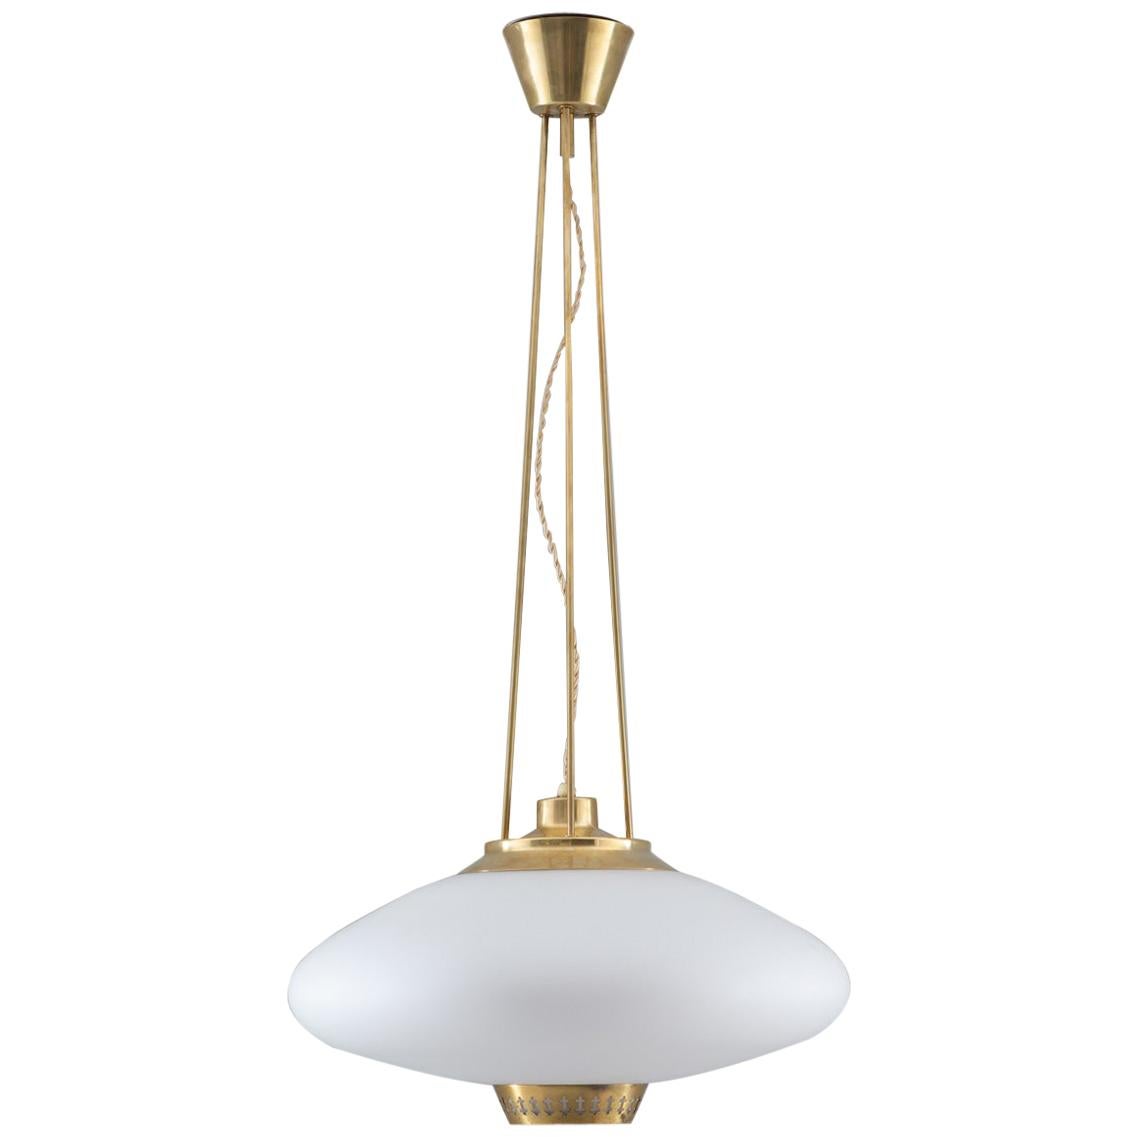 Swedish Midcentury Pendant in Brass and Glass by Hans Bergström for ASEA